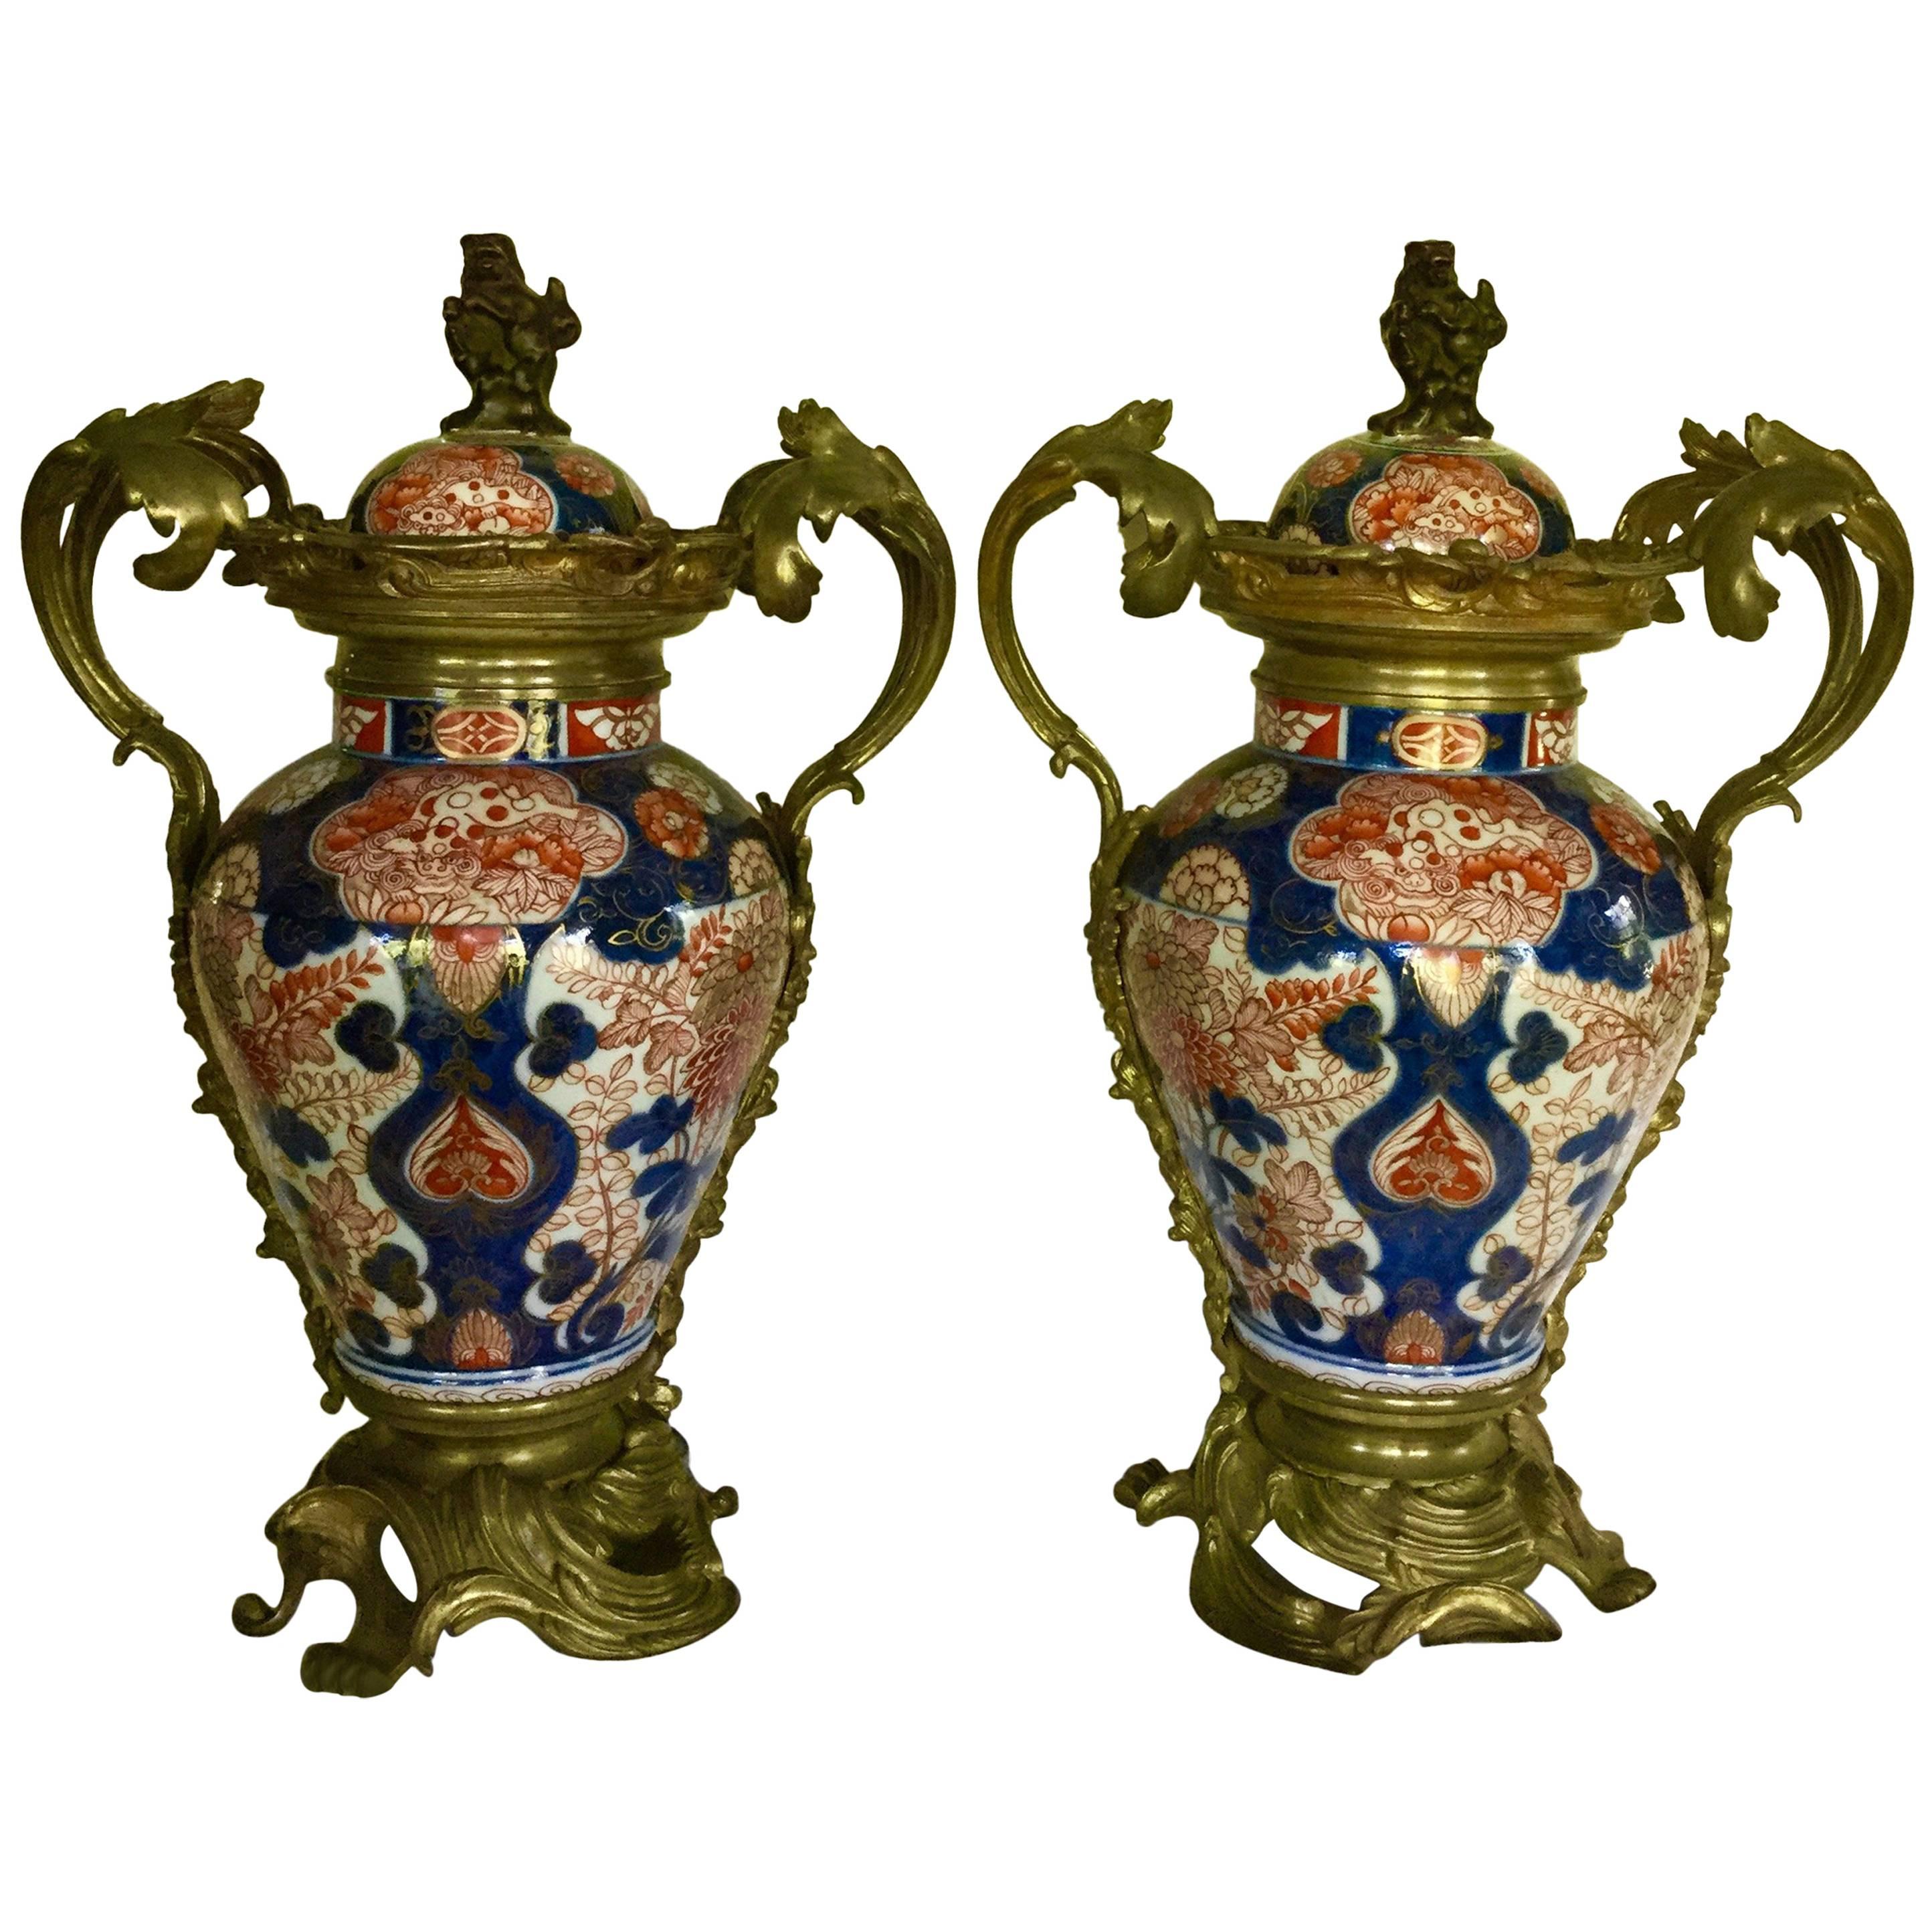 Extremely decorative antique Imari baluster jars with lids and bronze doré mounts.
Porcelain Japanese
Mounts French
19th century